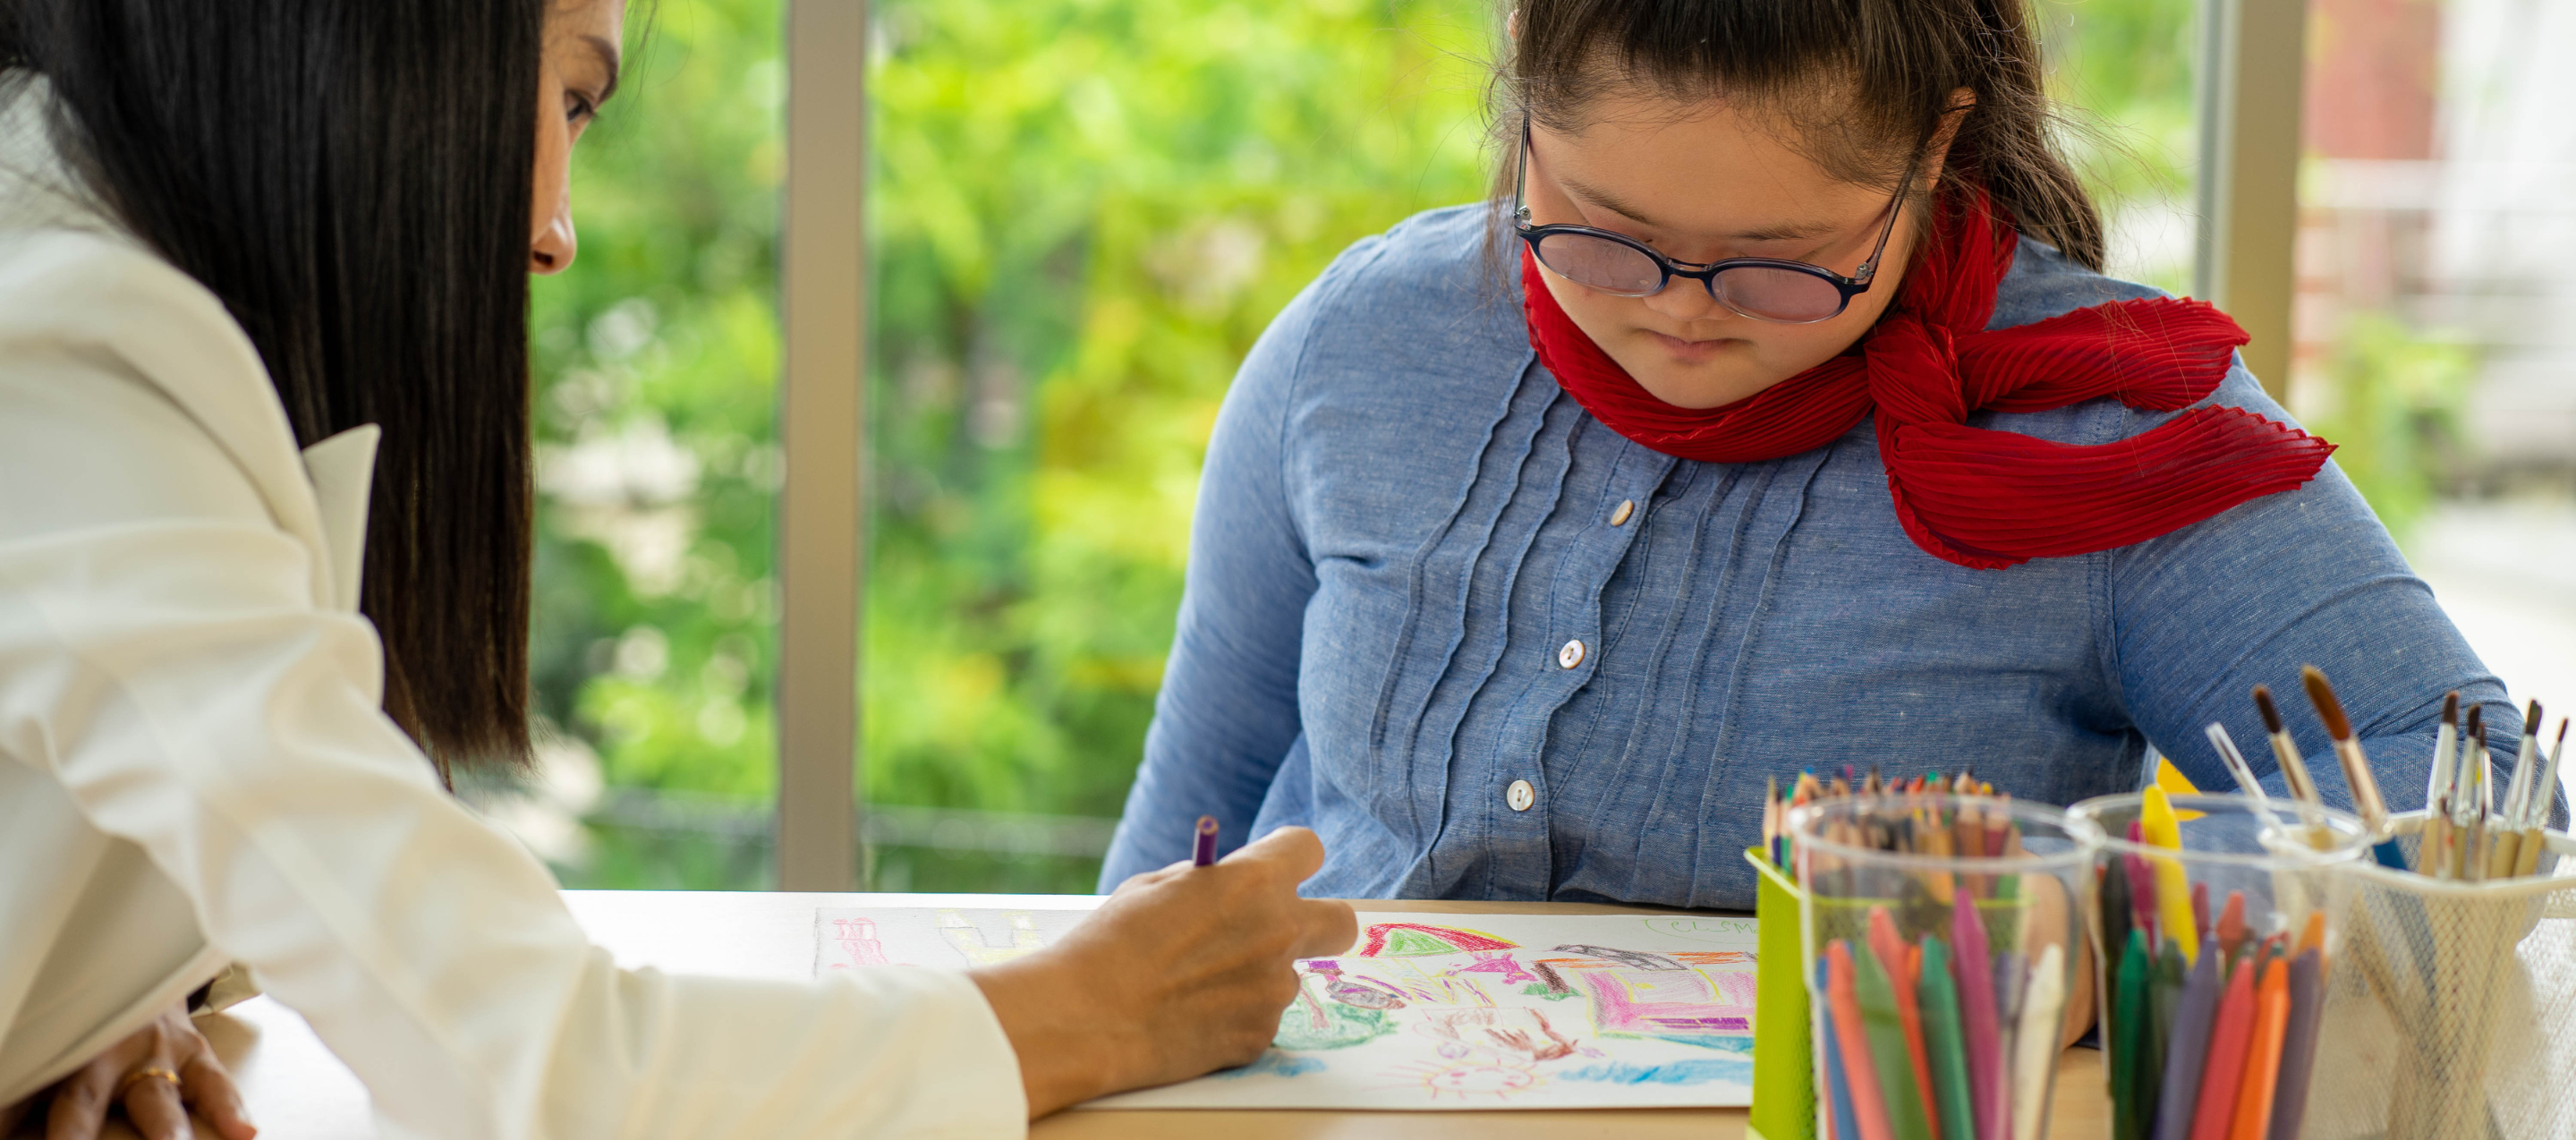 A young girl with learning disabilities drawing with a female carer sat with her.